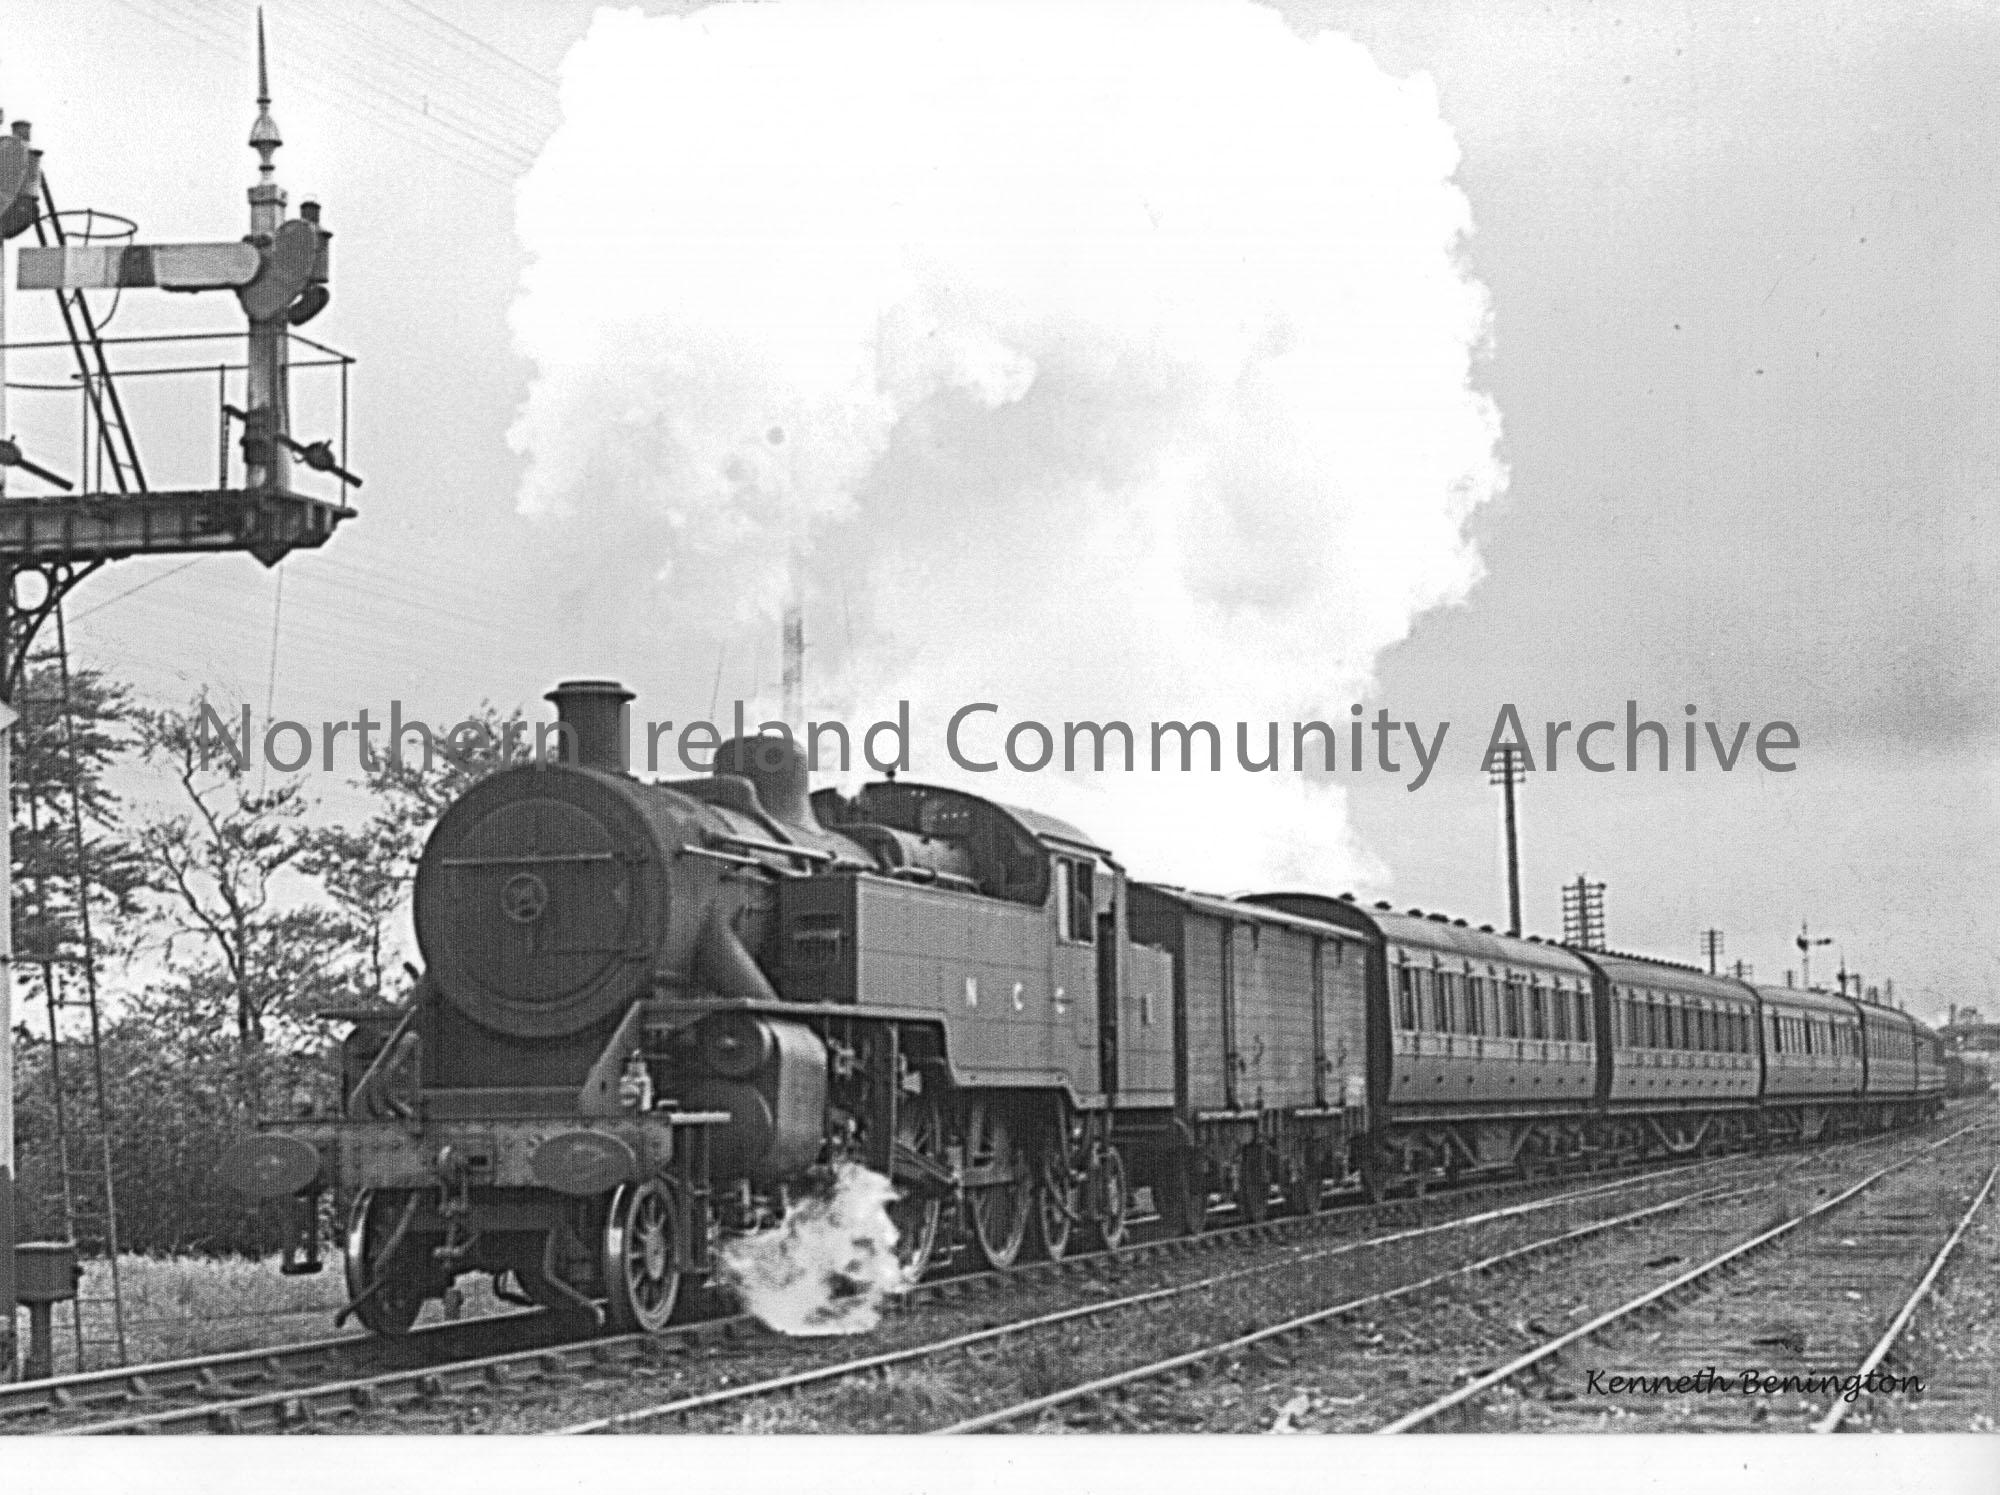 WT class 2-6-4T No.2 leaves Ballymoney with a stopping train for Belfast York Road, with a 6-wheeled van next to the engine.